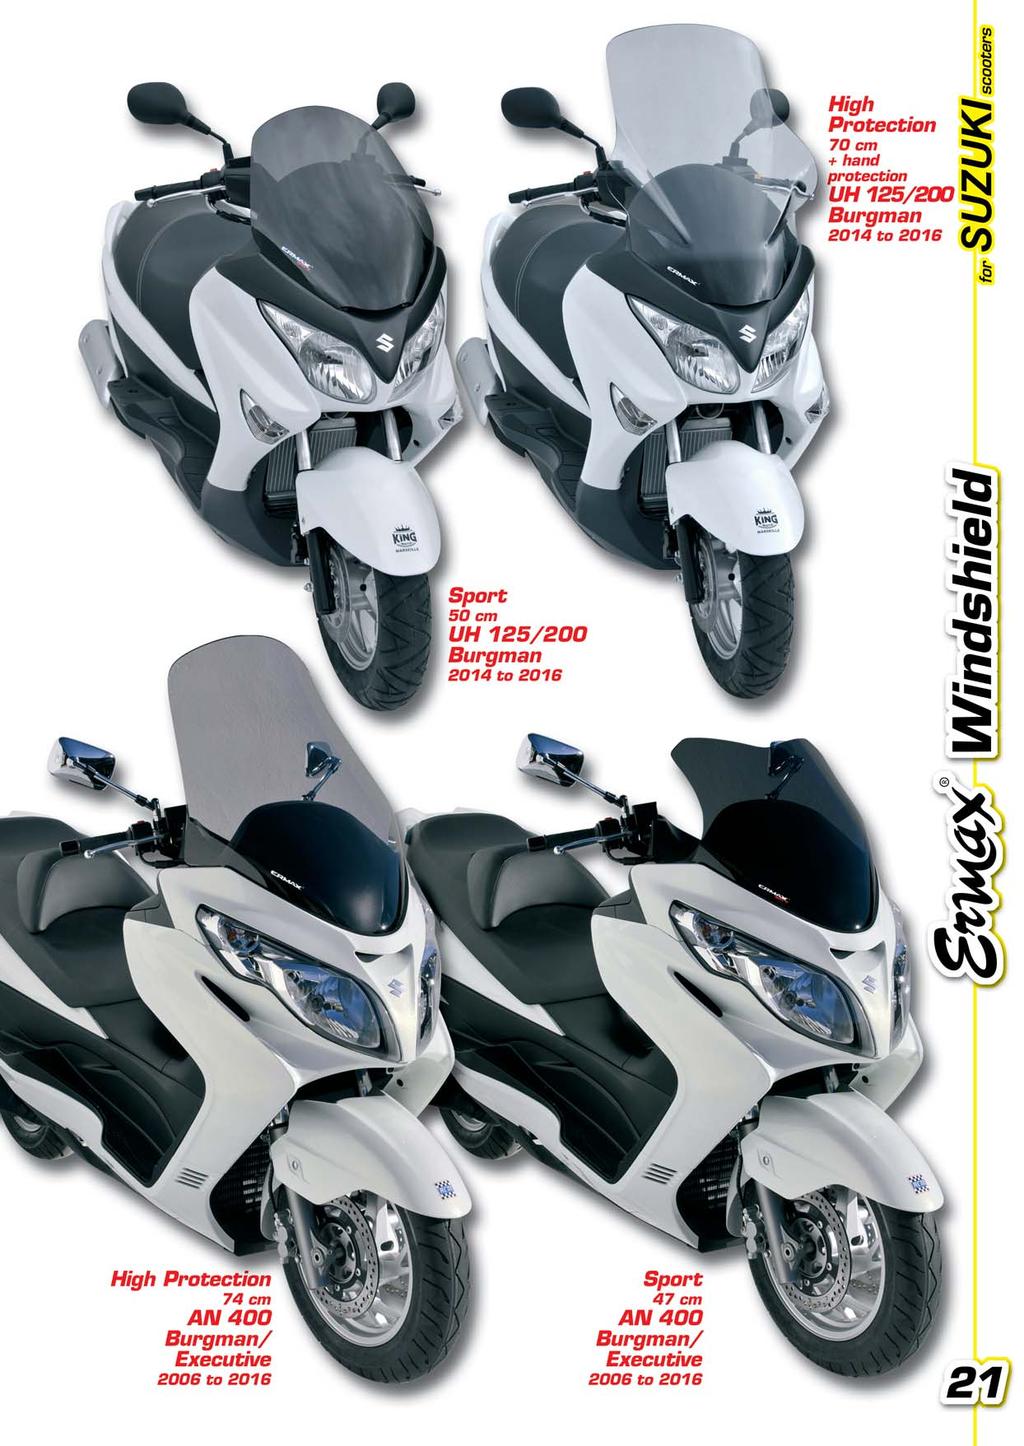 The use of the SUZUKI brand andor photos representing SUZUKI scooter models is made solely